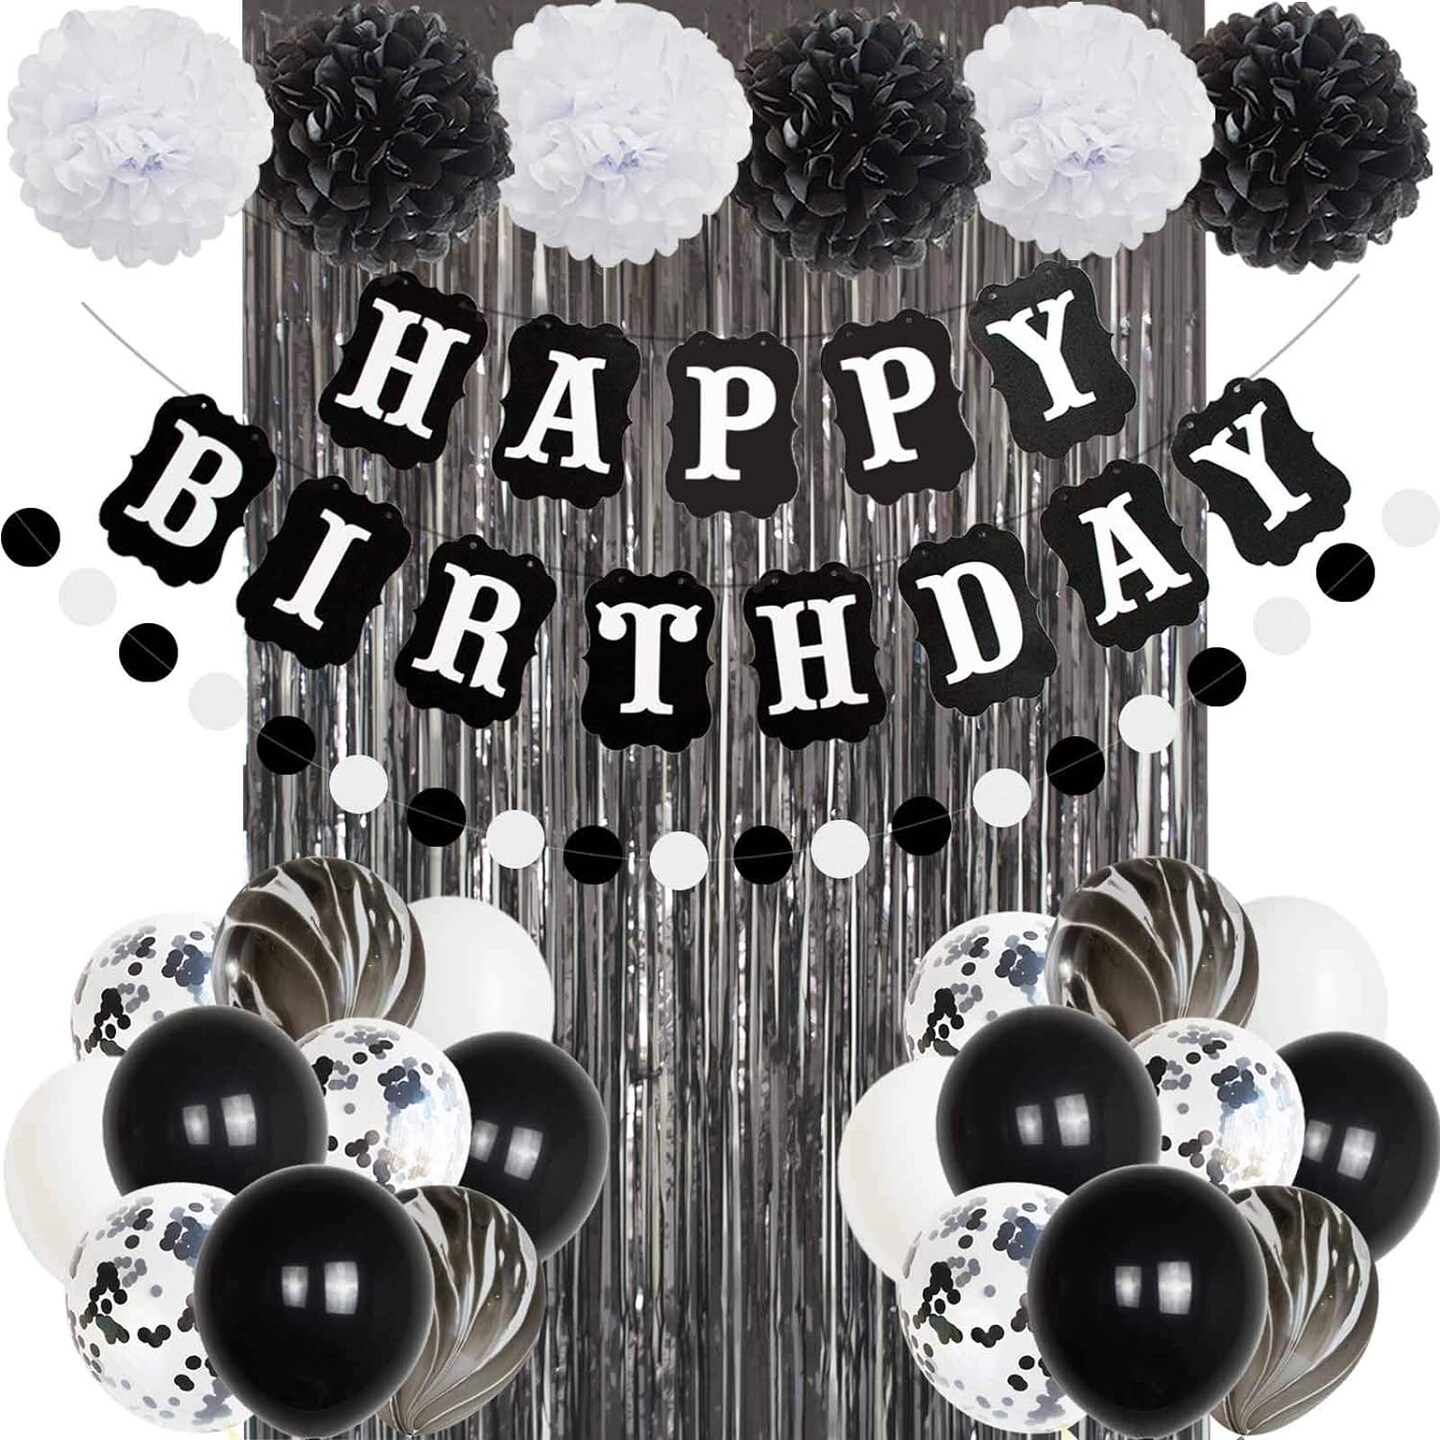 Black and White Happy Birthday Party Decorations, 30 Pcs Balloons Banner Foil Fringe Curtains, for Men Women